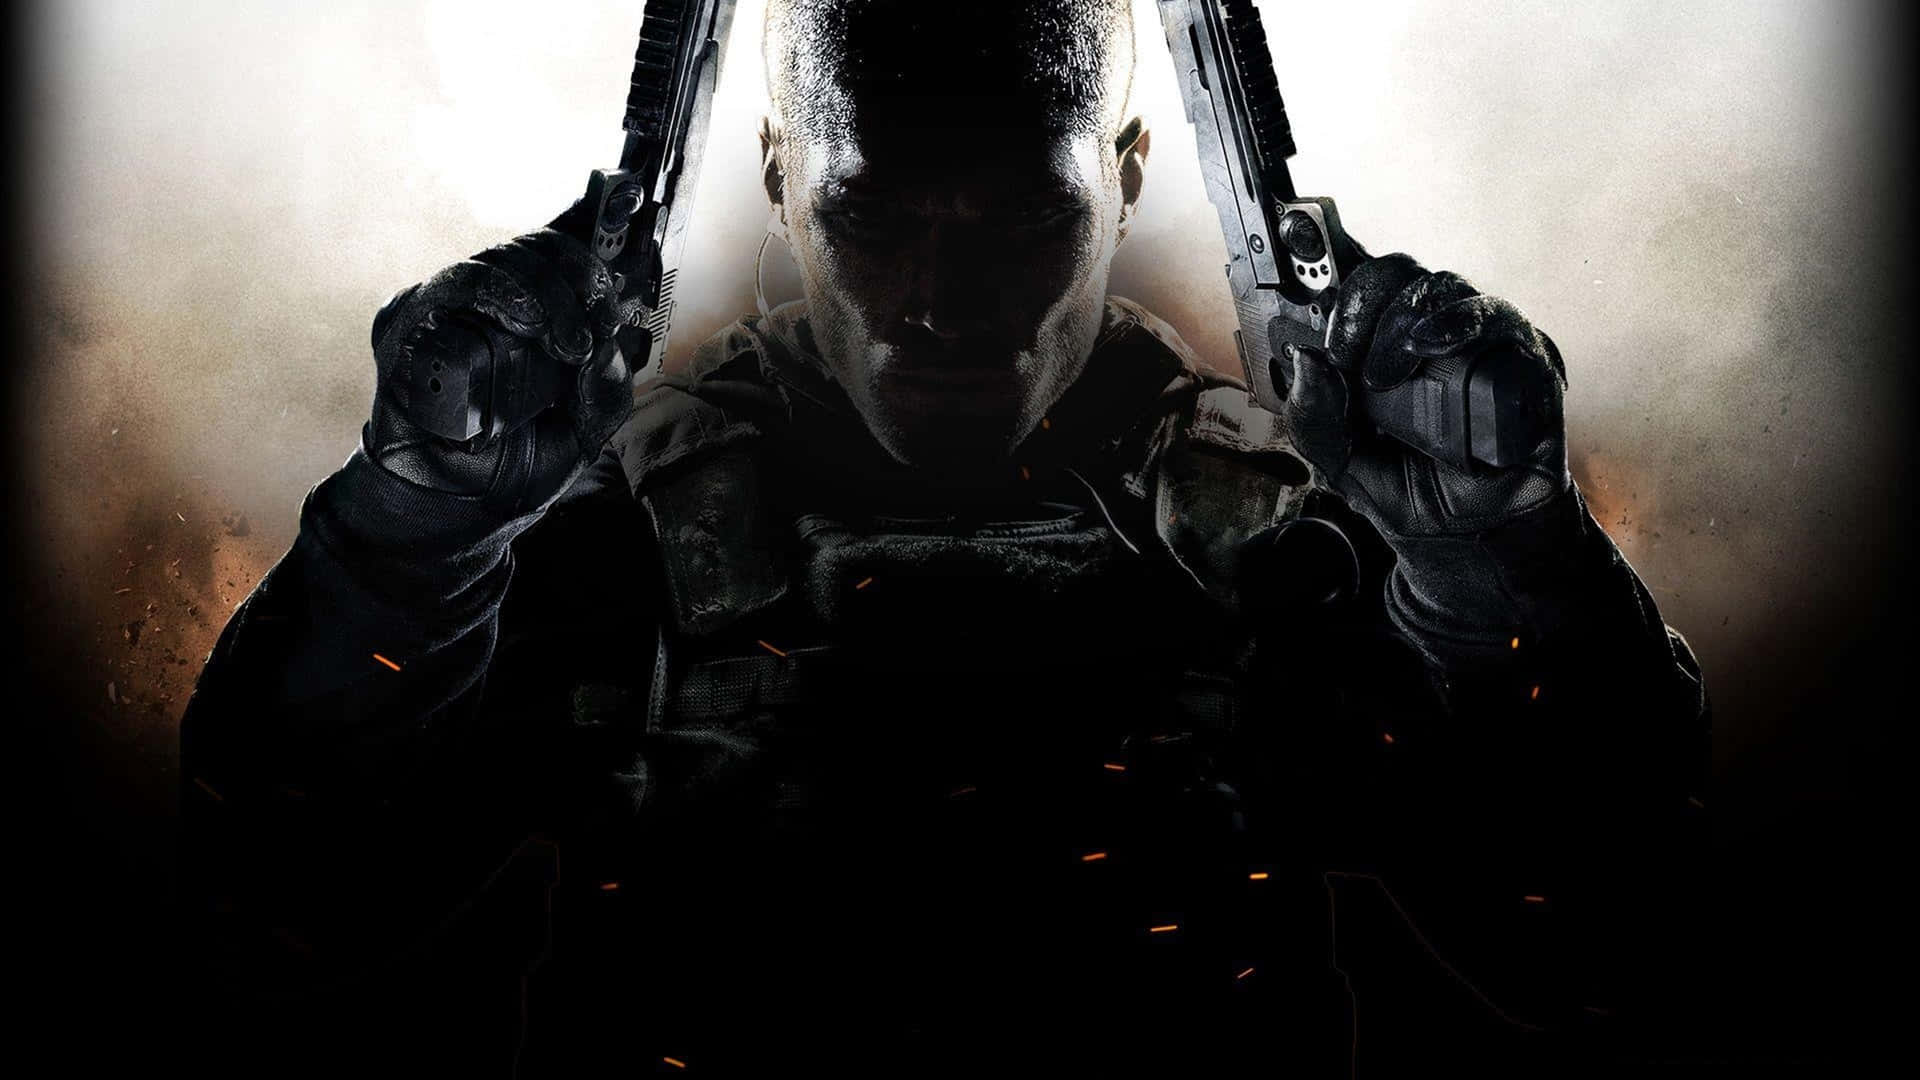 Free Call Of Duty Wallpaper Downloads, [400+] Call Of Duty Wallpapers for  FREE 